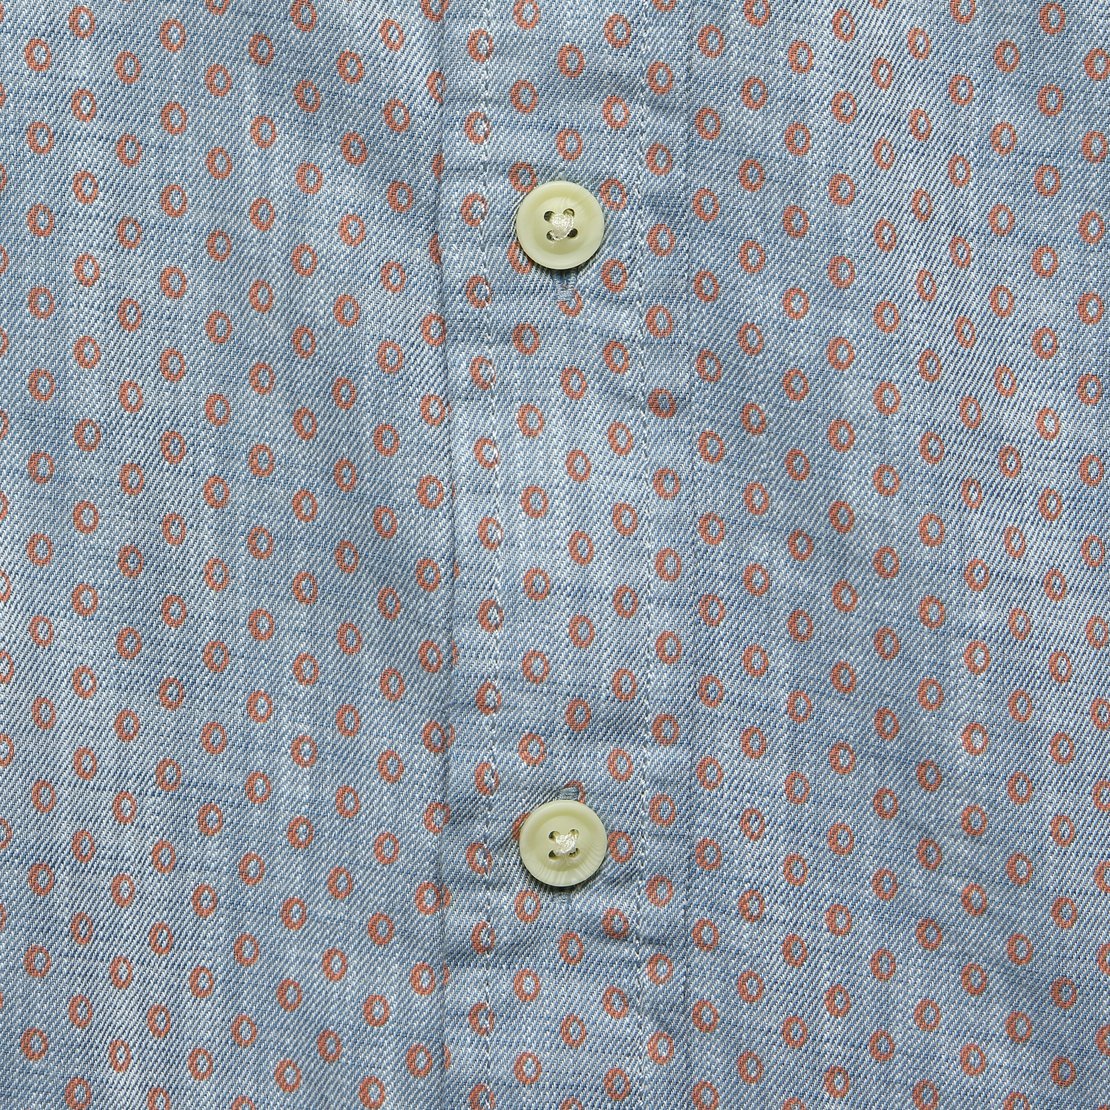 Ahab Open Dot Print Shirt - Blue - Grayers - STAG Provisions - Tops - S/S Woven - Other Pattern